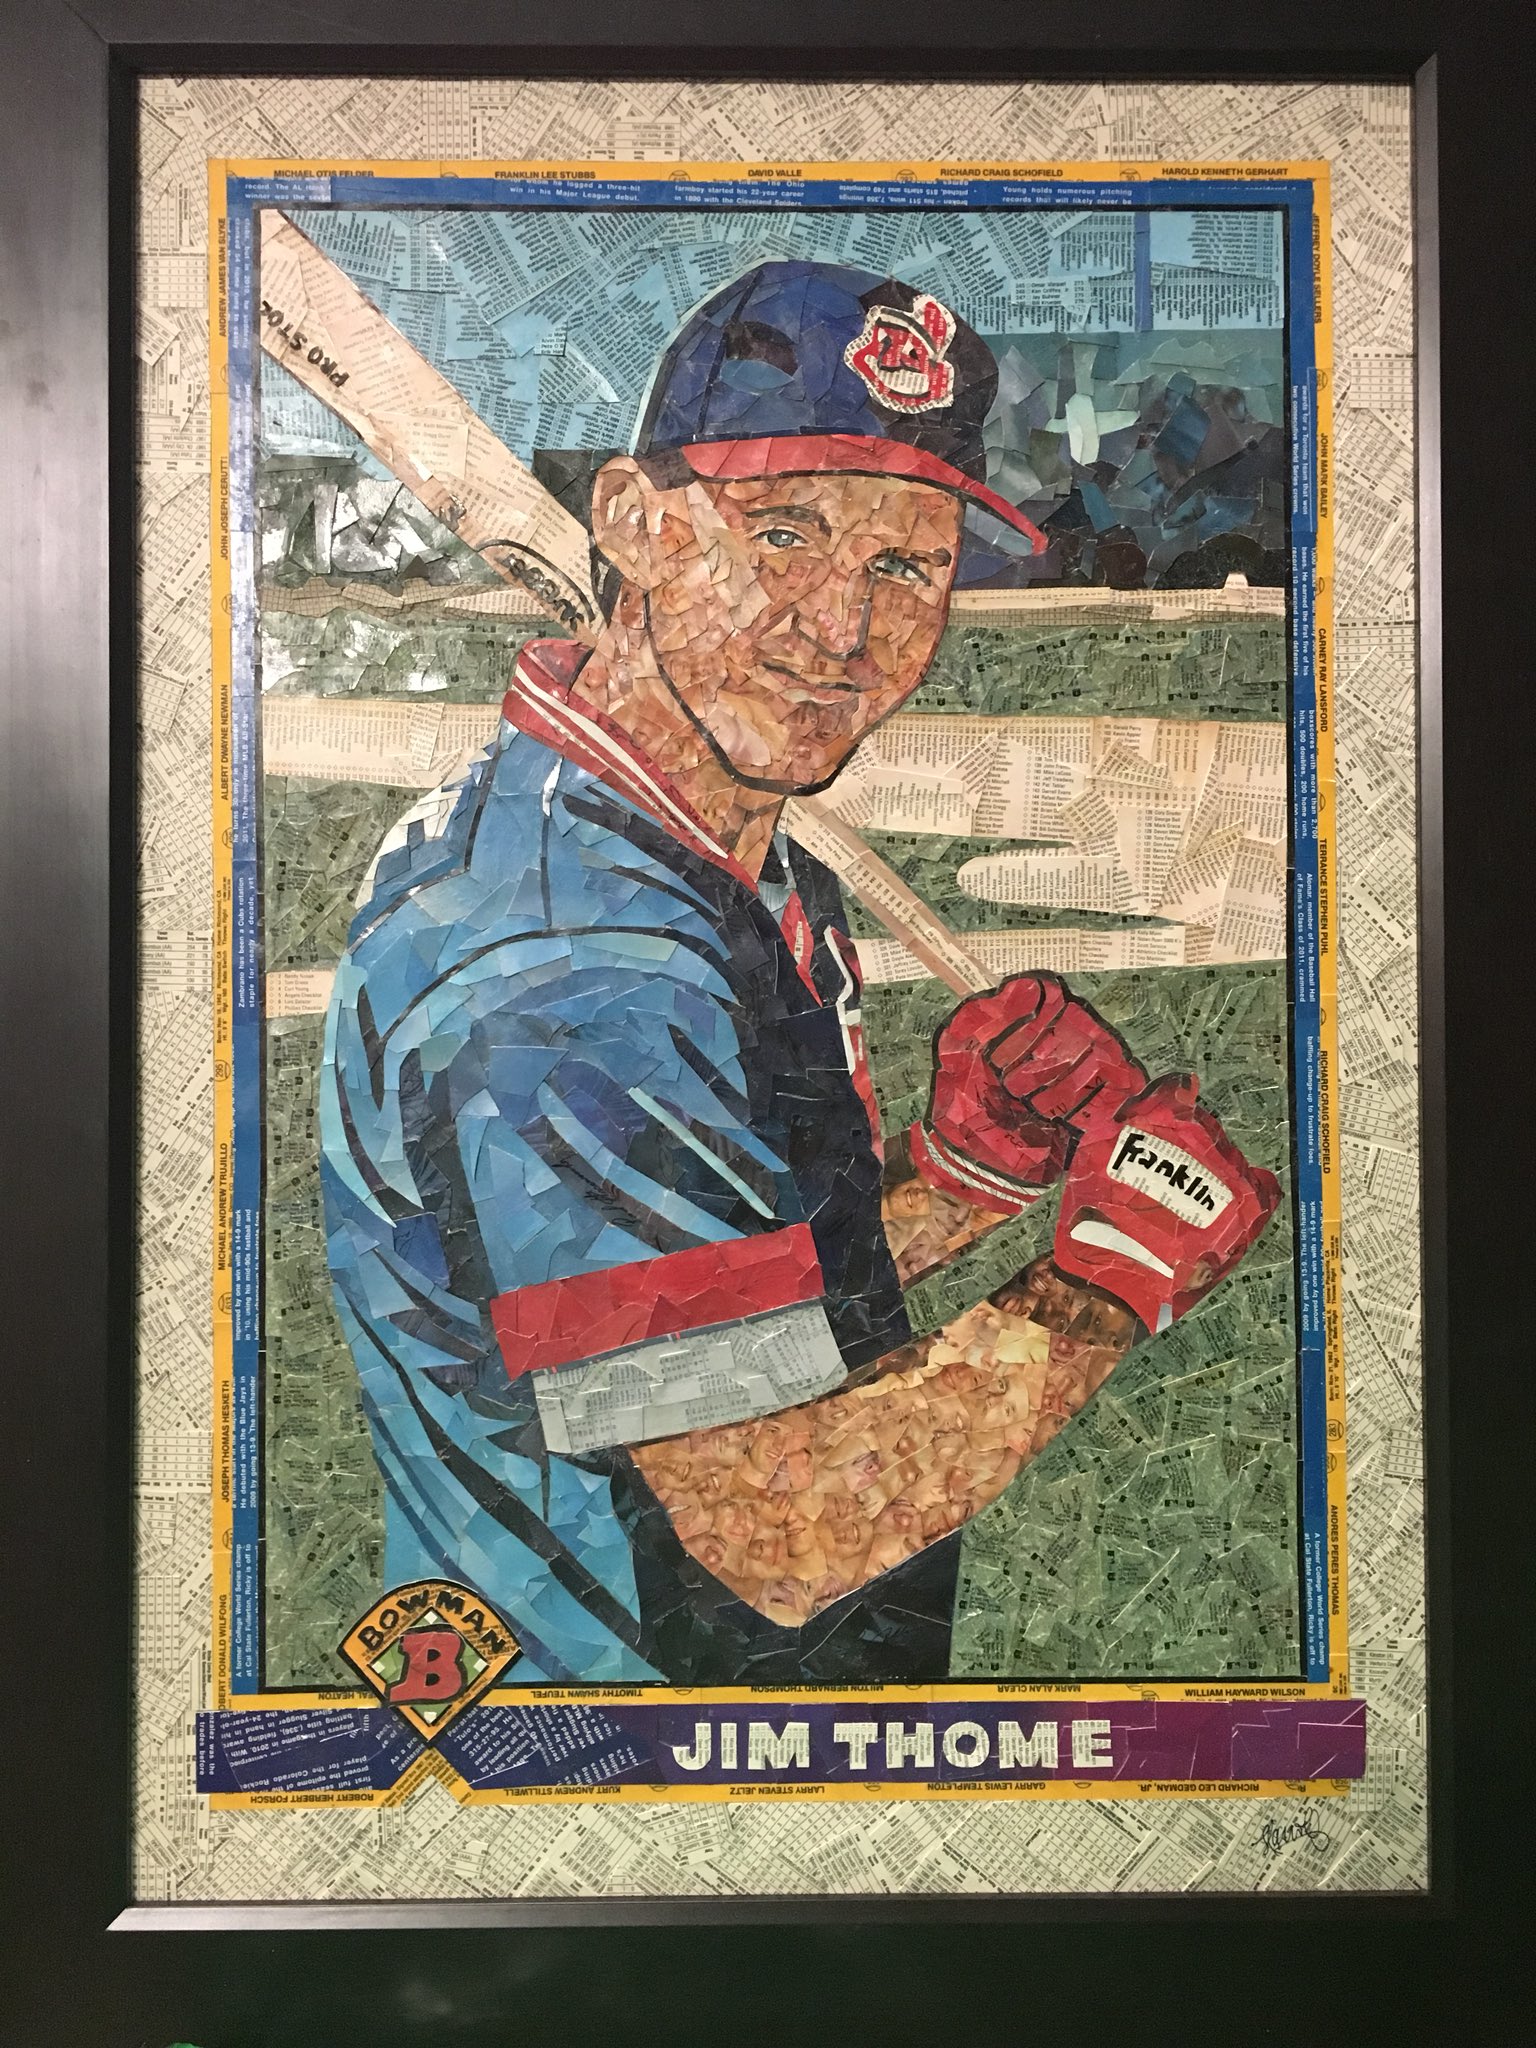 Happy 48th Birthday, Jim Thome! Here is his 1991 Bowman RC, made from cut common baseball cards. 